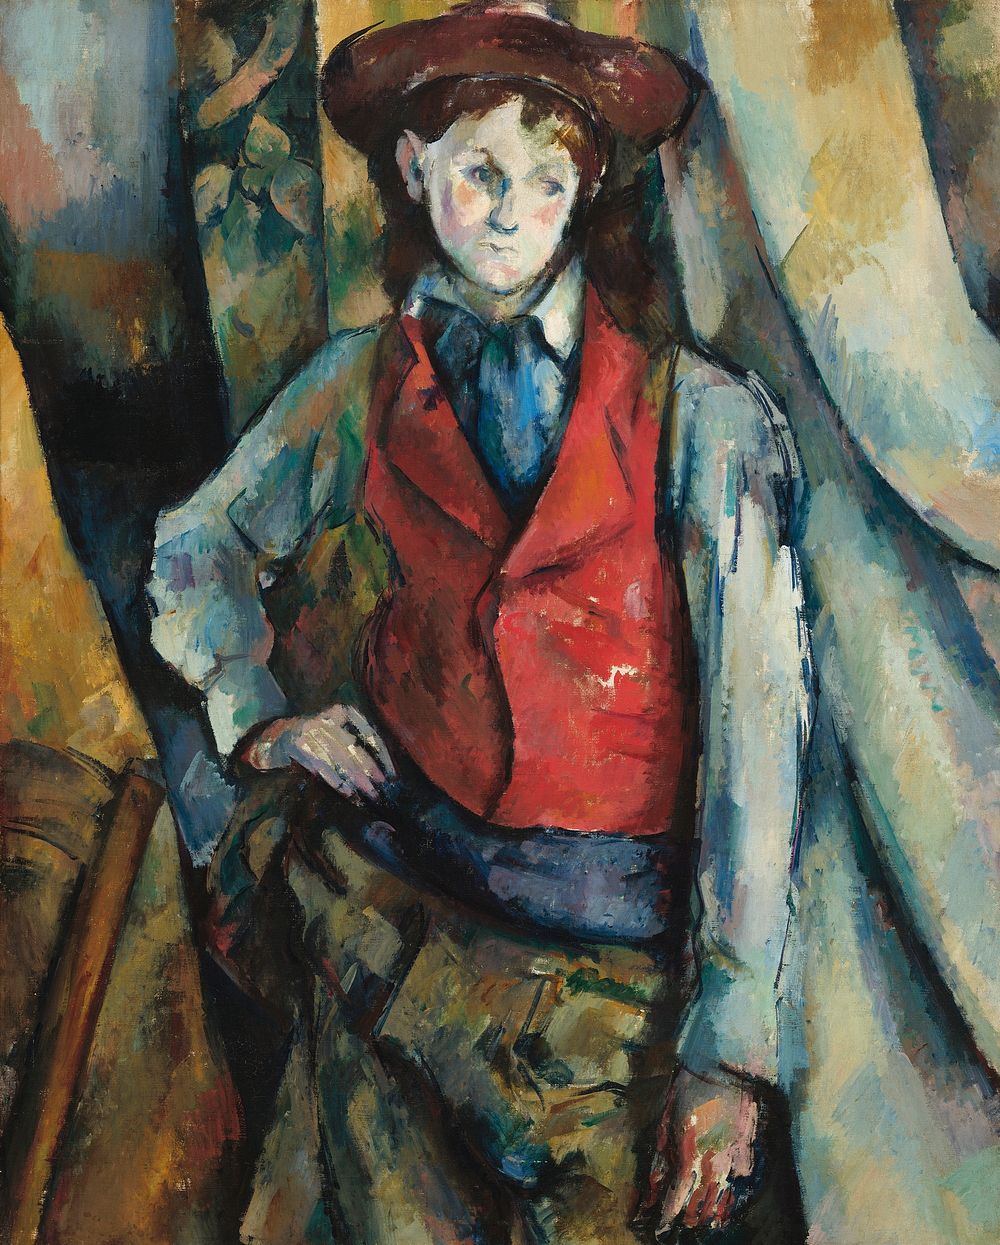 Boy in a Red Waistcoat (ca. 1888&ndash;1890) by Paul C&eacute;zanne. Original from The National Gallery of Art. Digitally…